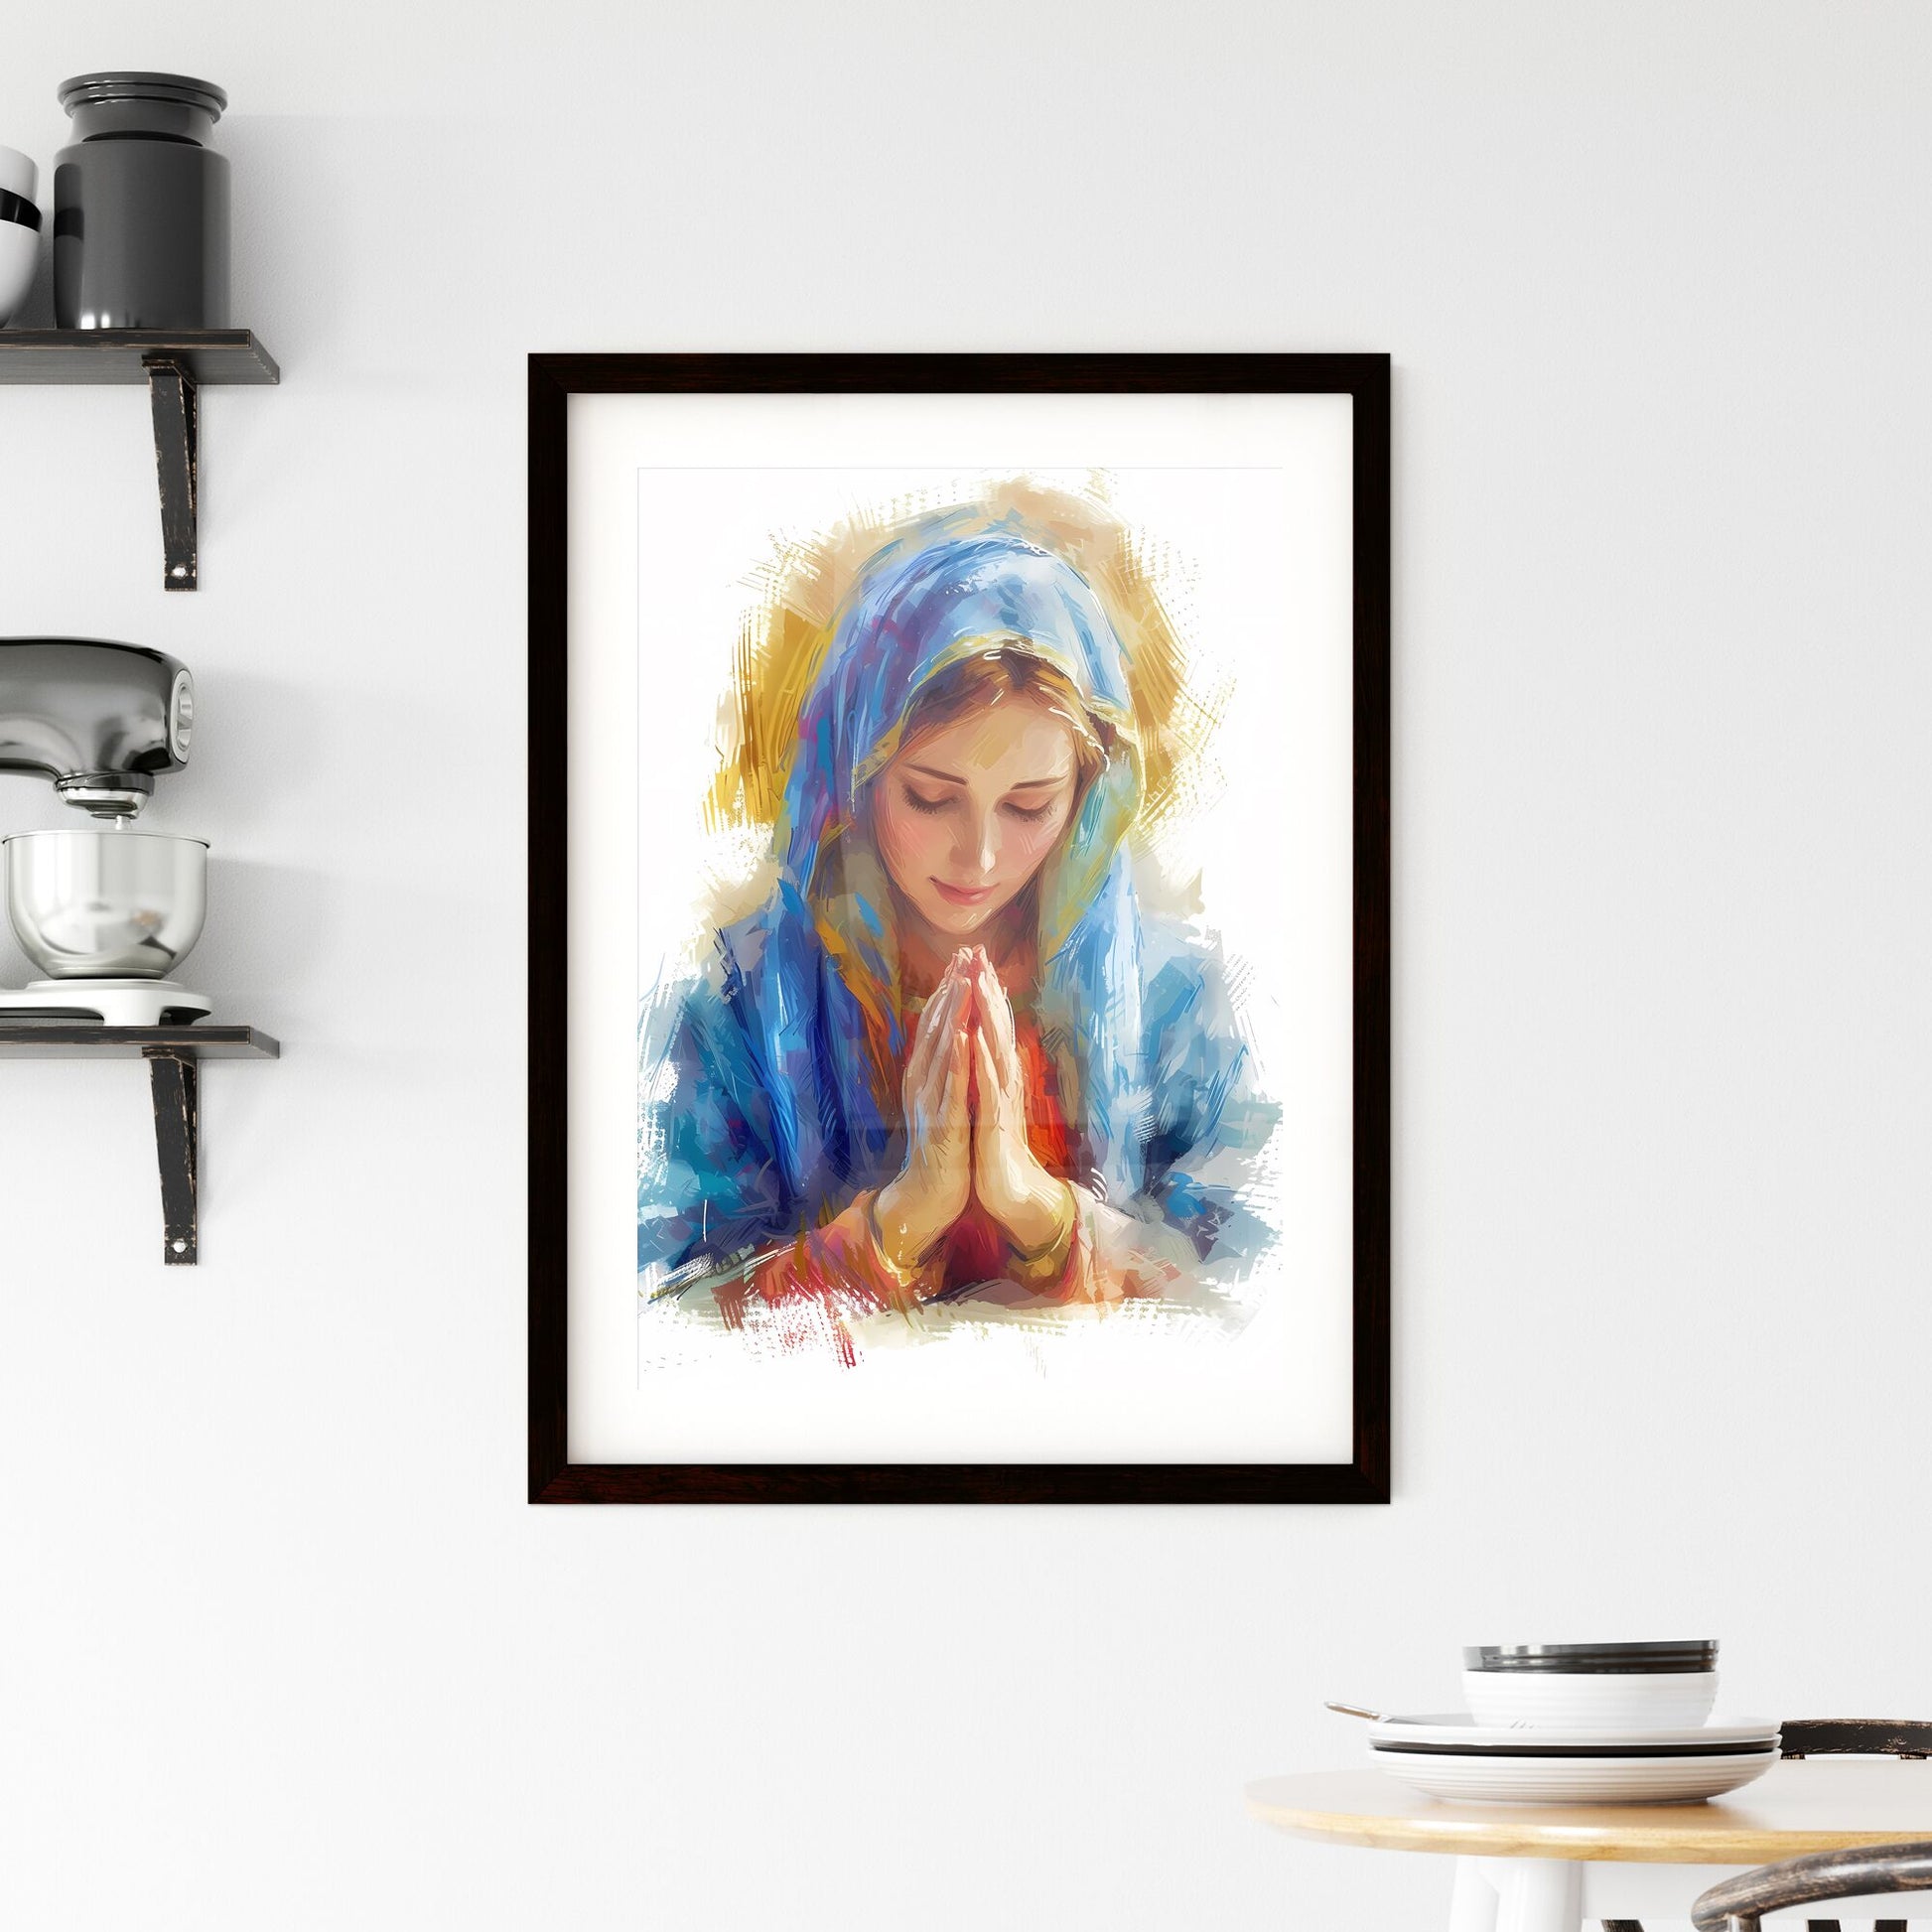 Mary Mother of God Poster, halo above her head, hands in praying sign - Art print of a woman with a blue head scarf praying Default Title